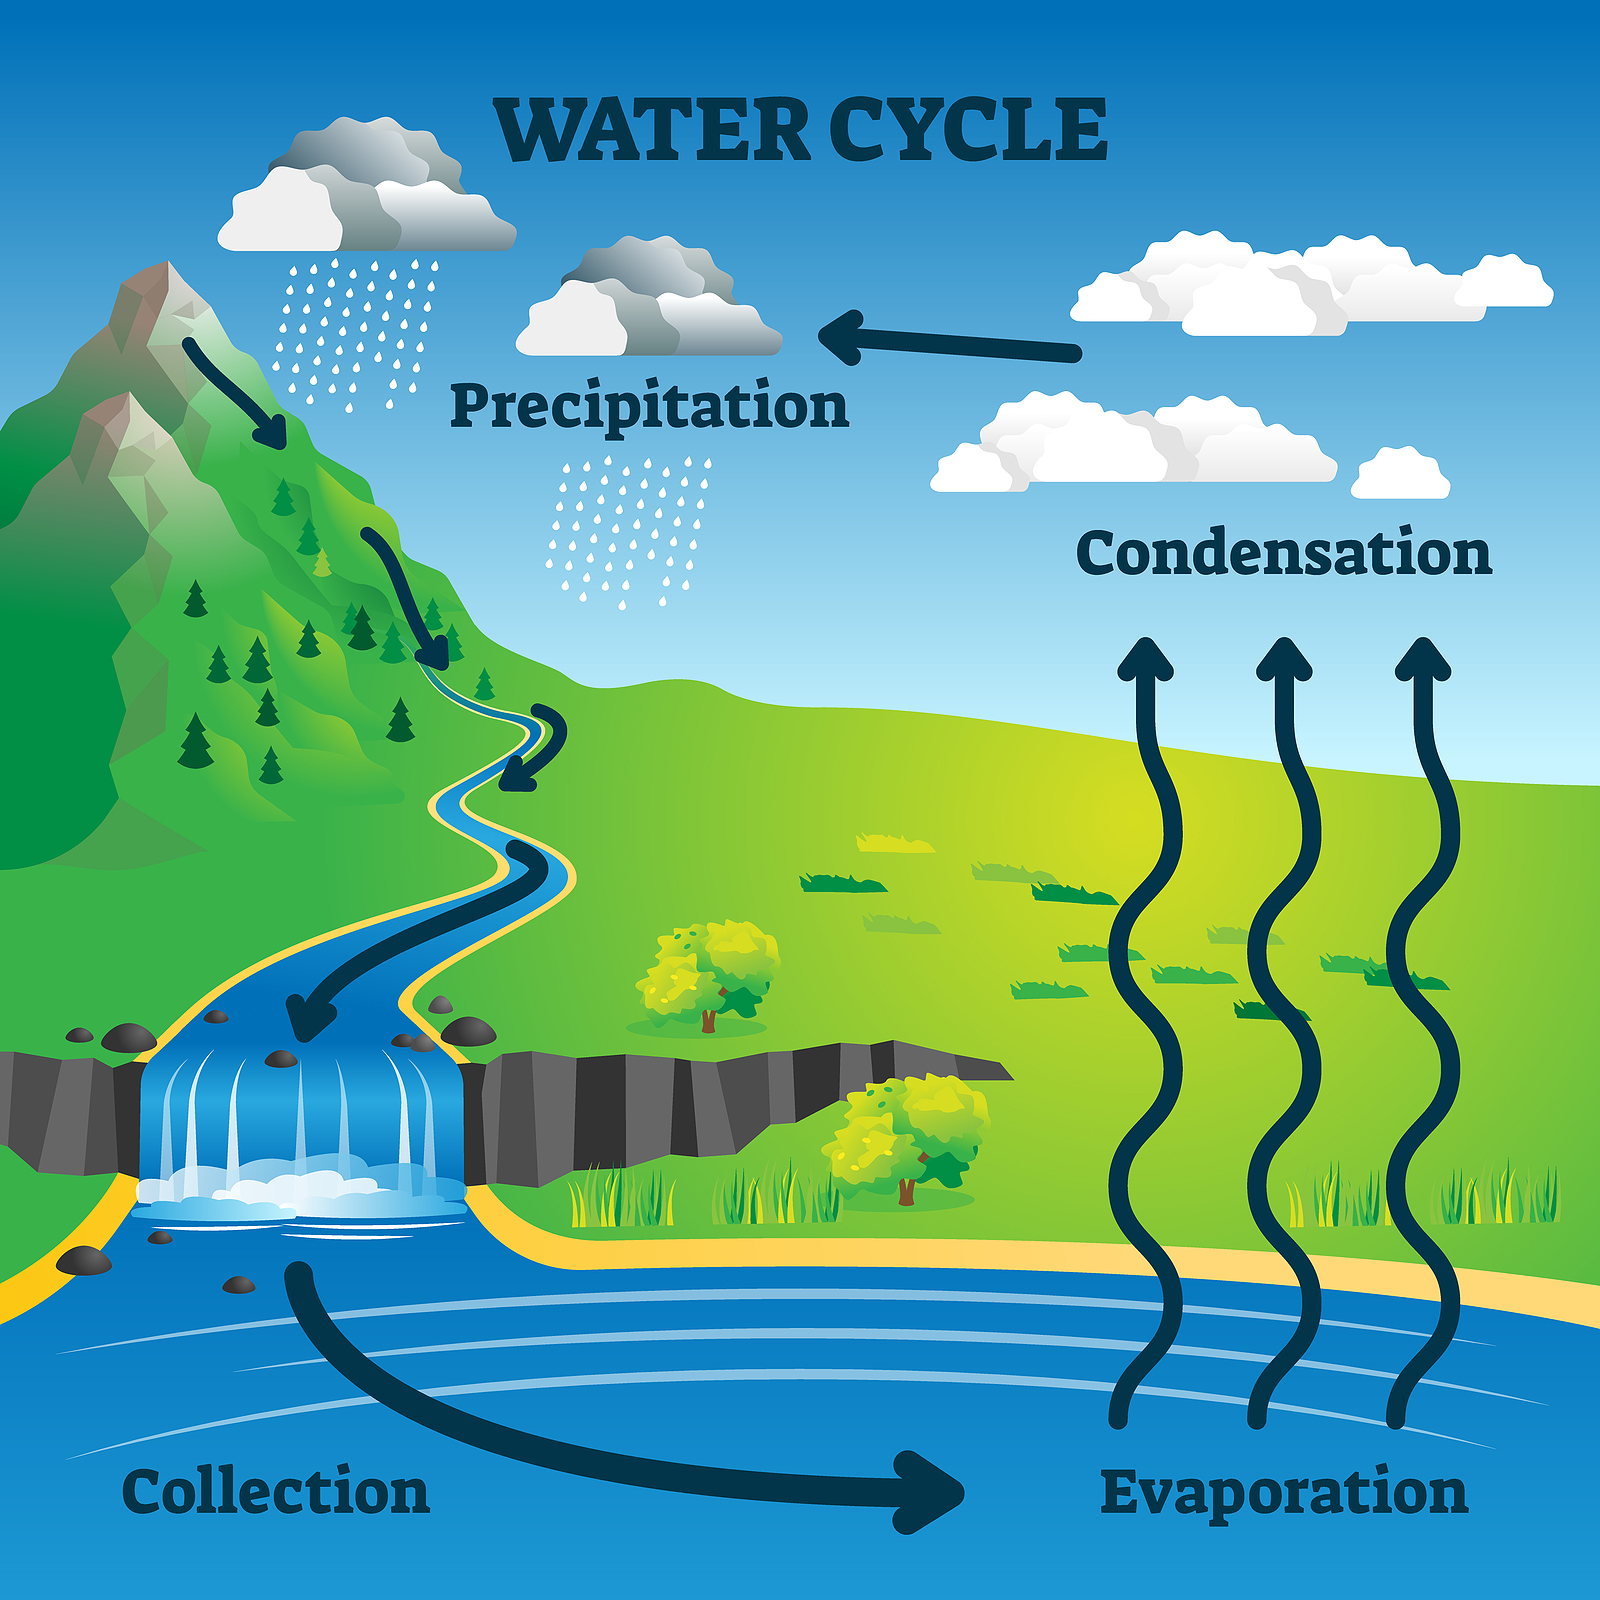 Collection 104+ Images water cycle pictures with labels Completed